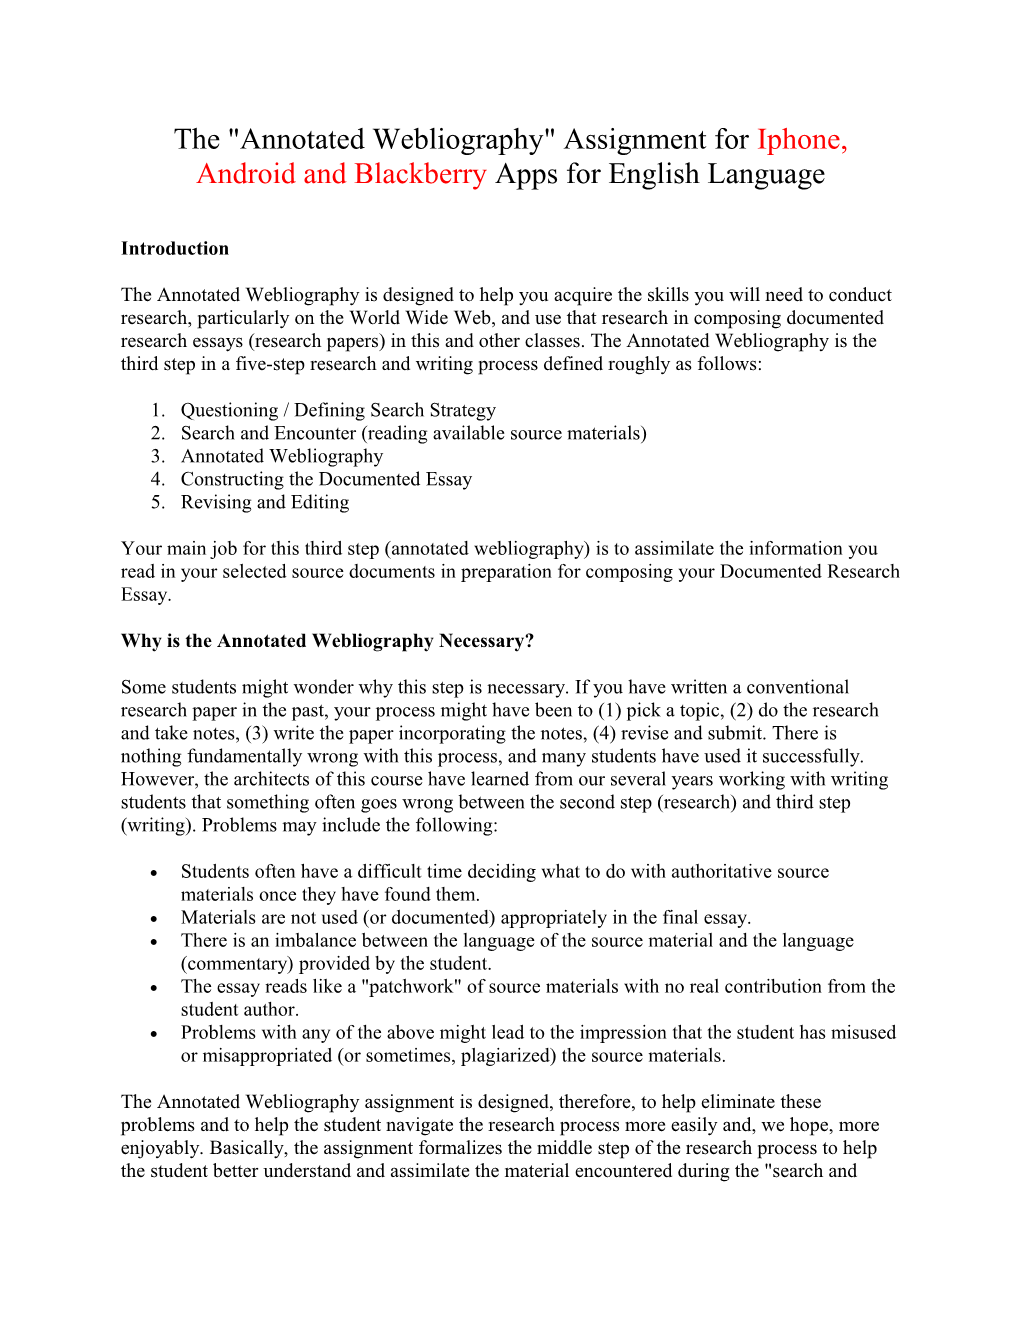 The Annotated Webliography Assignment